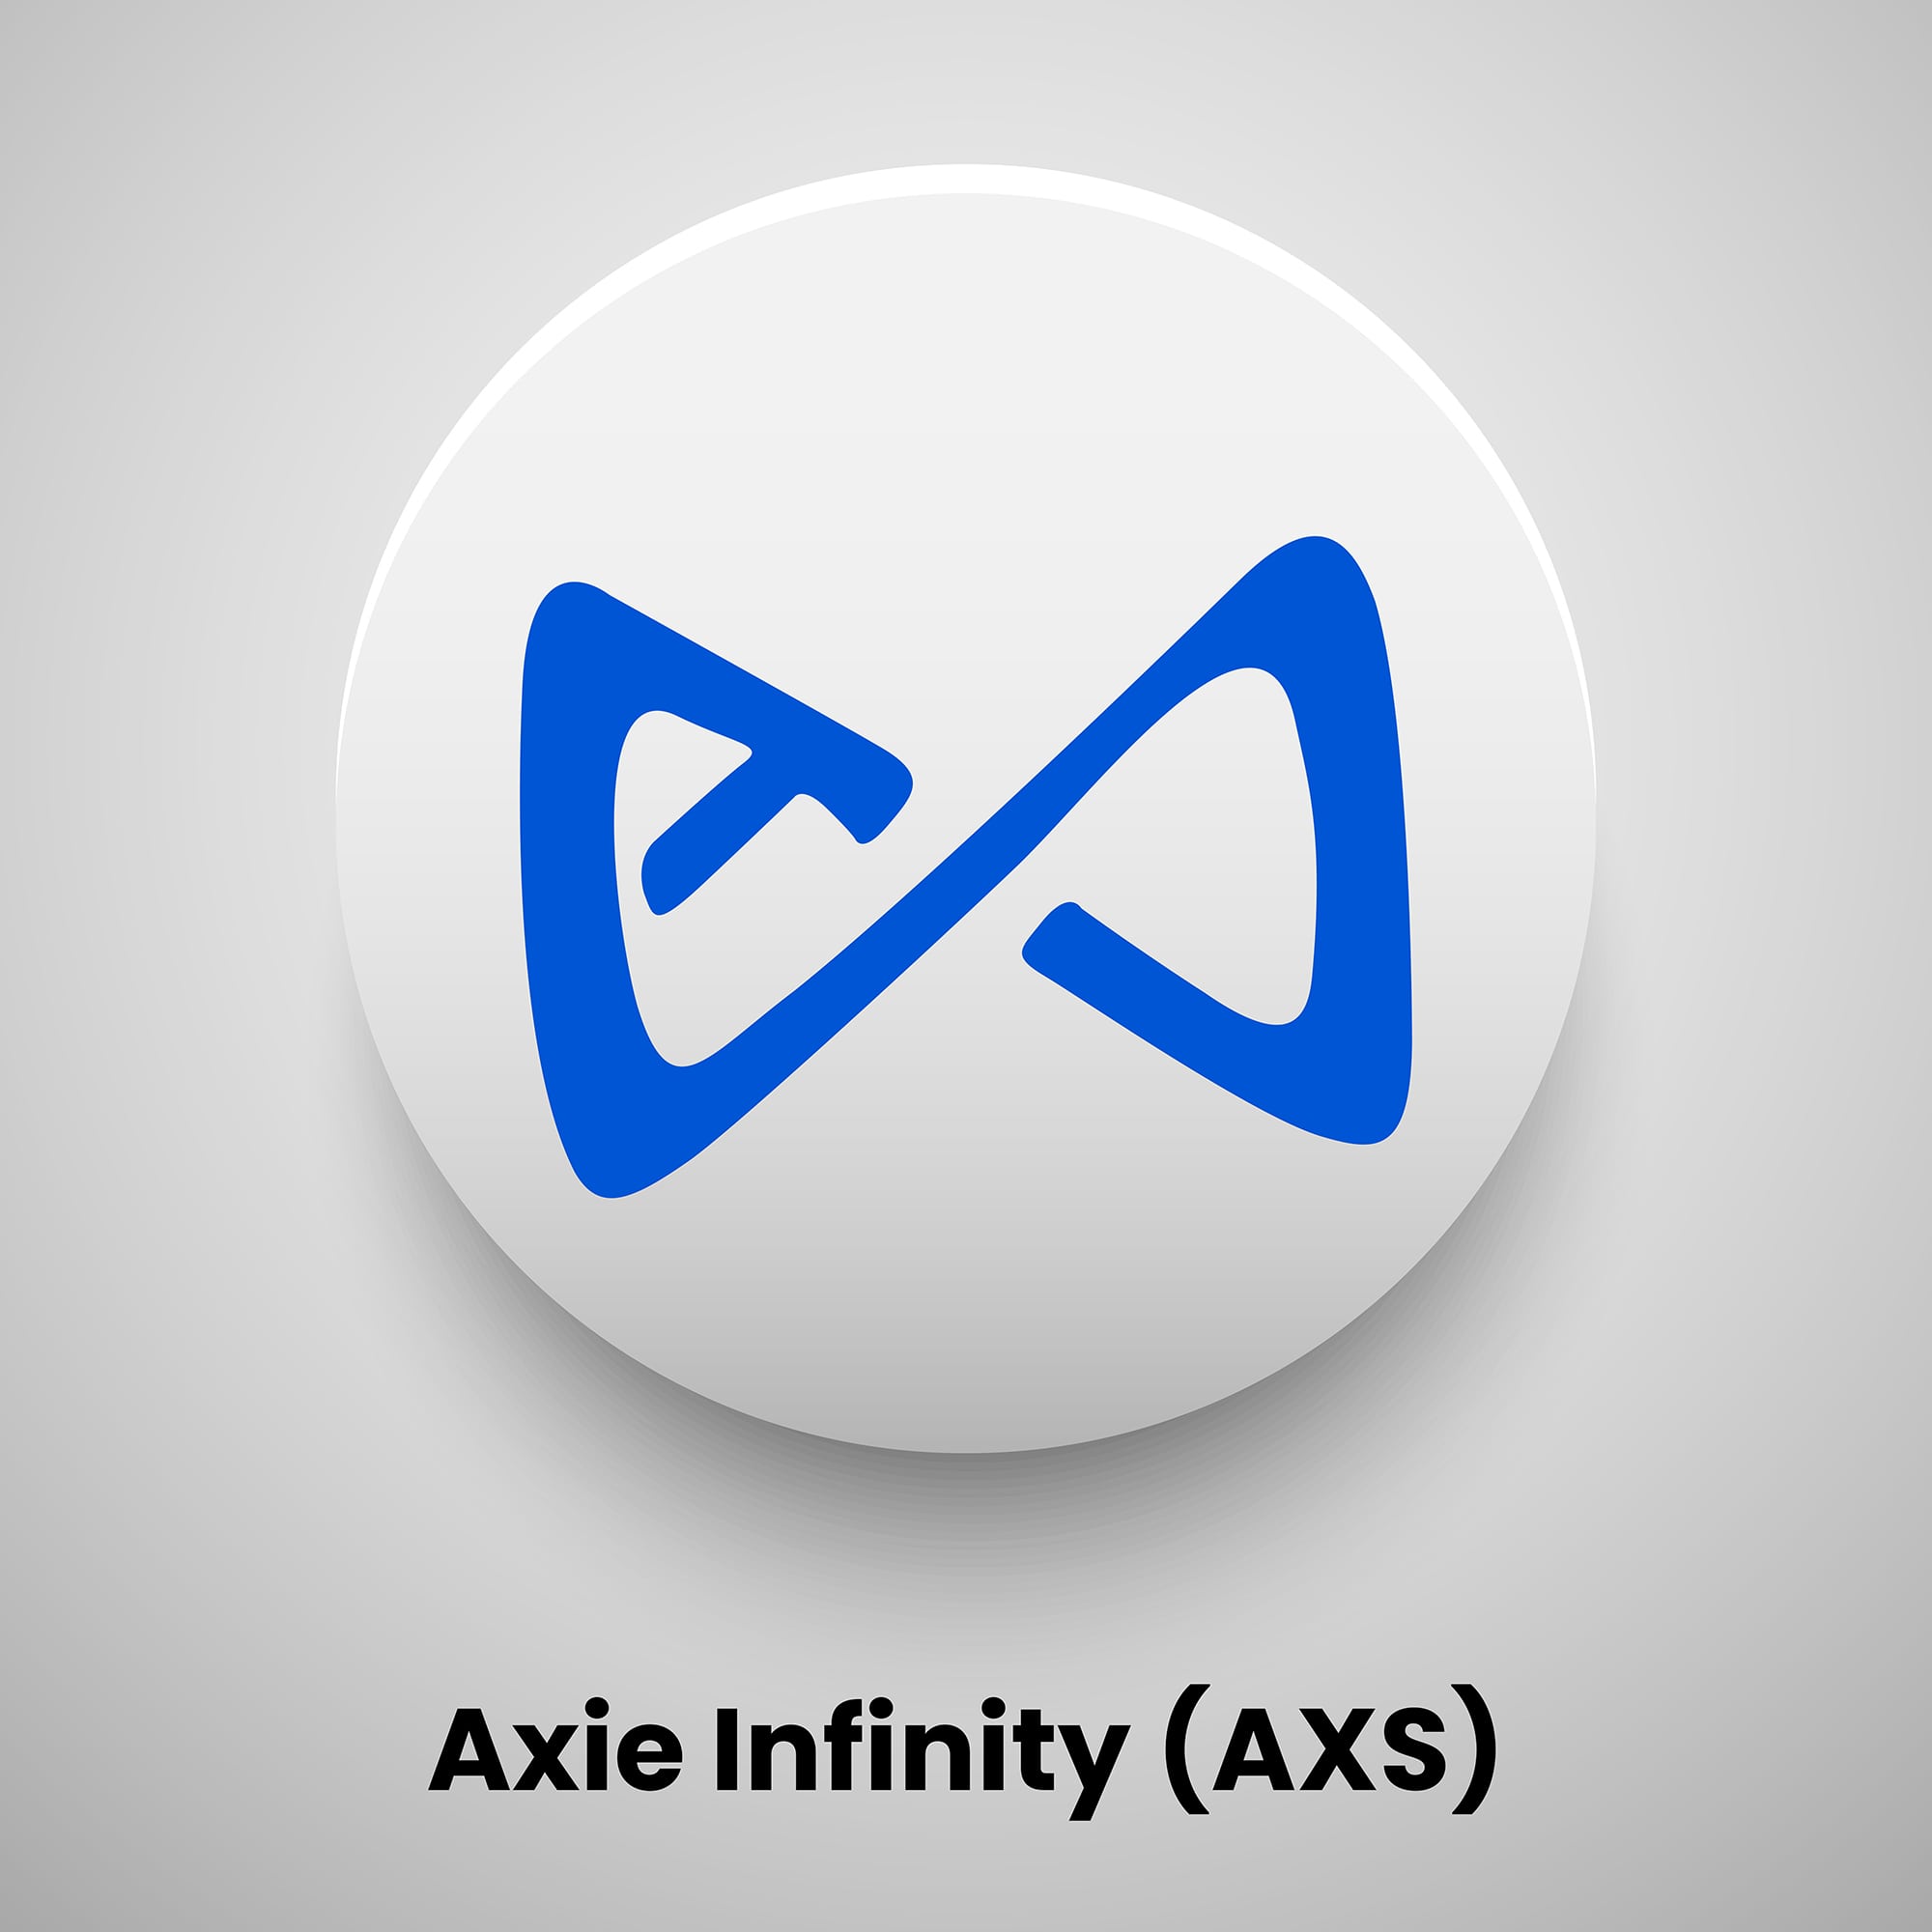 Axie Infinity (AXS) crypto currency logo free vector download